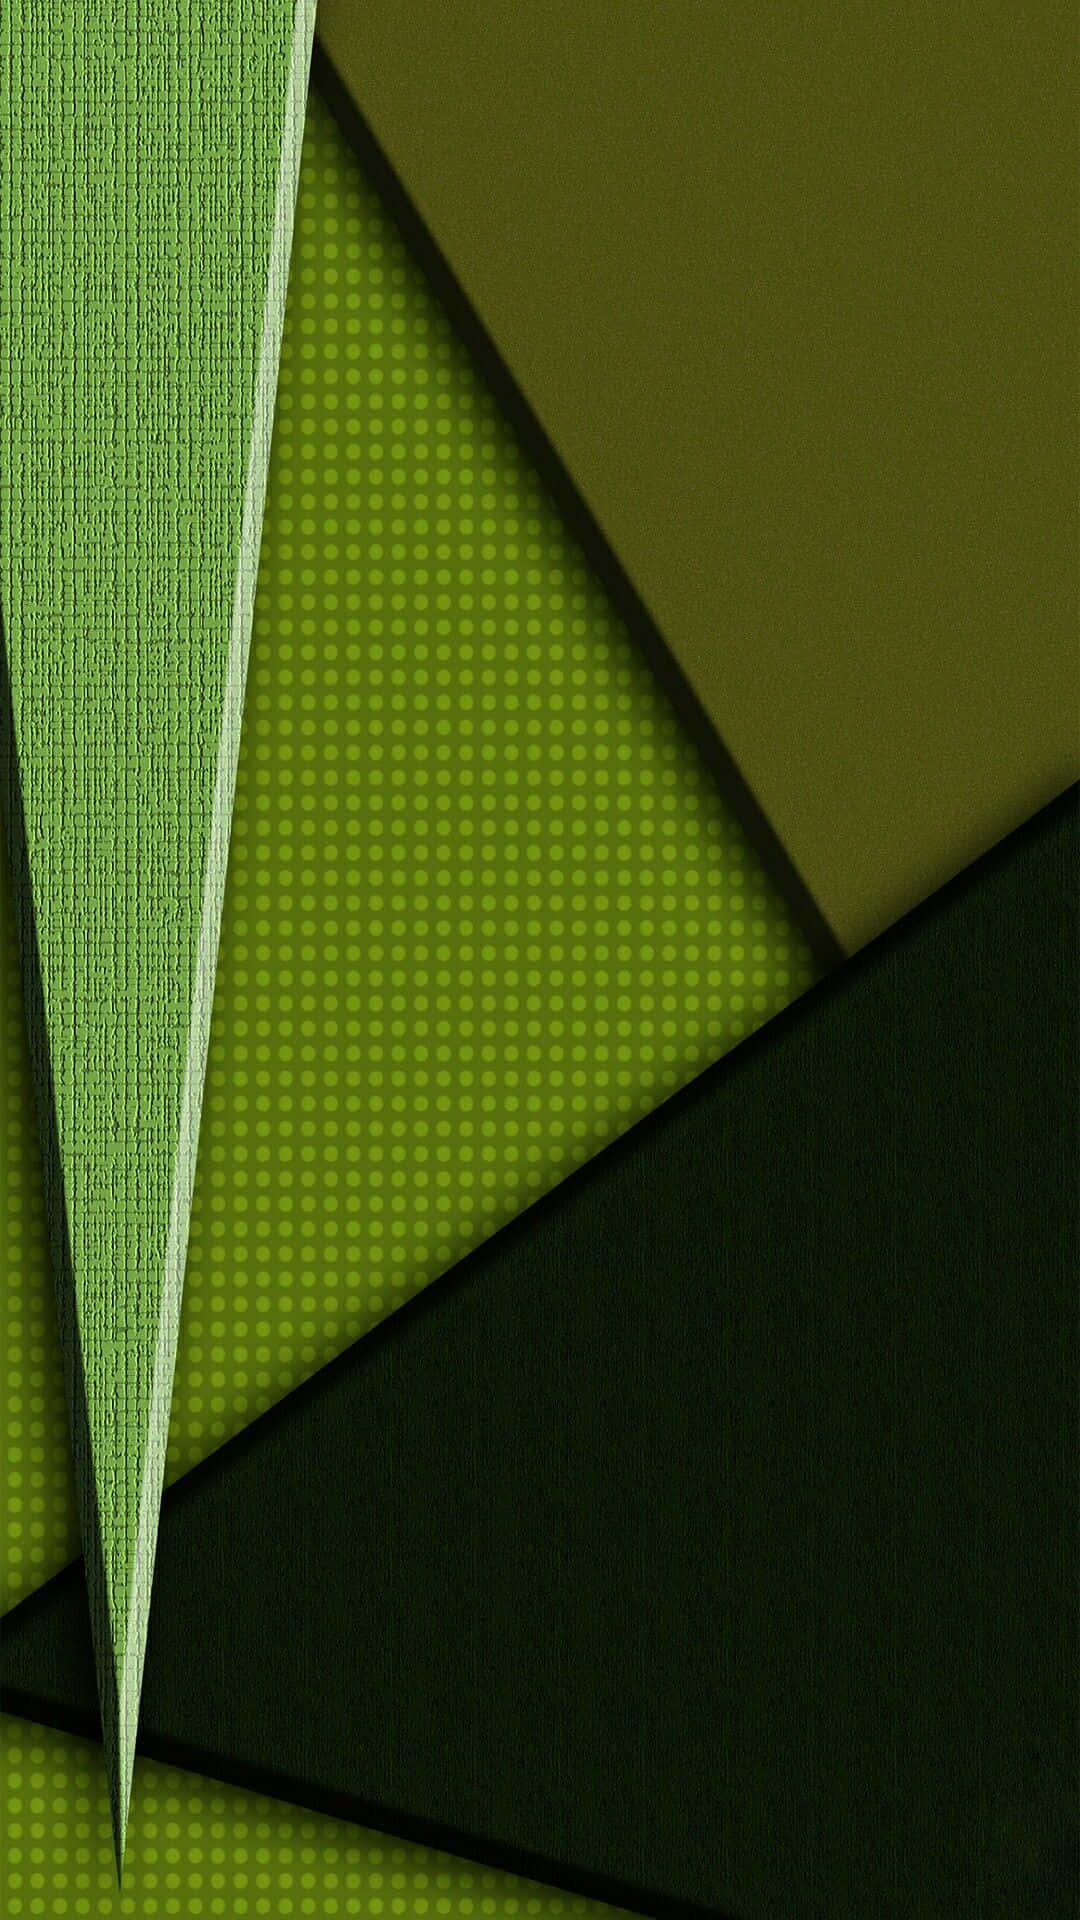 Experience the modern look of the Olive Green iPhone Wallpaper